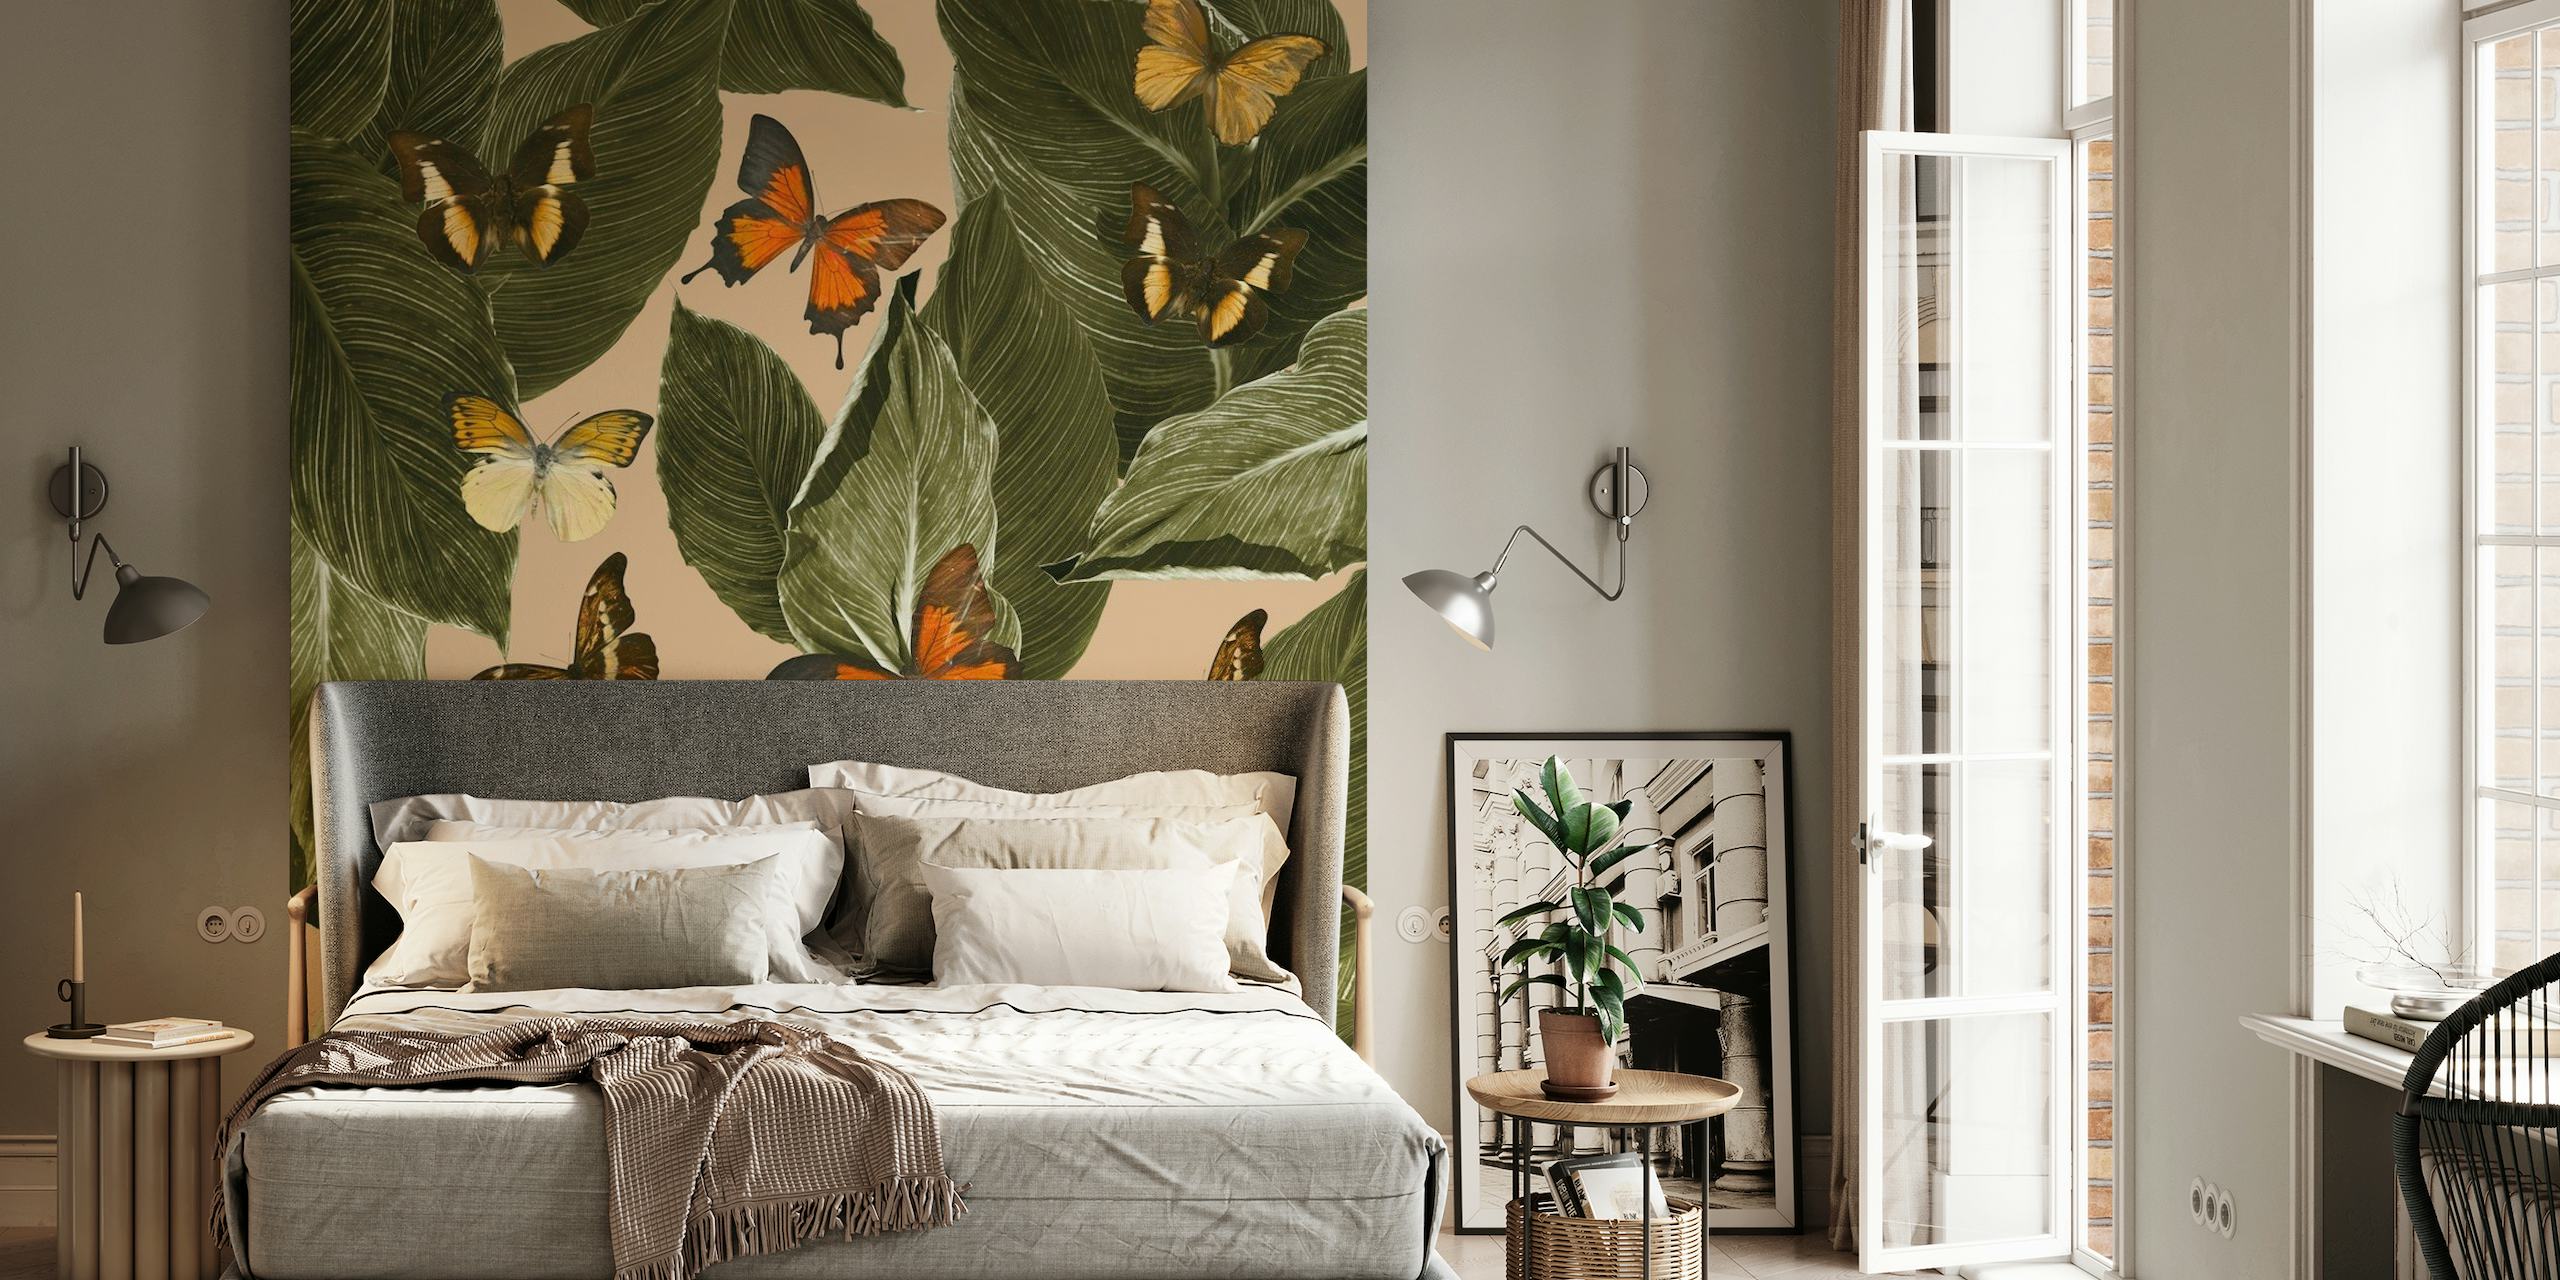 Butterfly Jungle Delight wall mural featuring green leaves and colorful butterflies on a warm-toned background